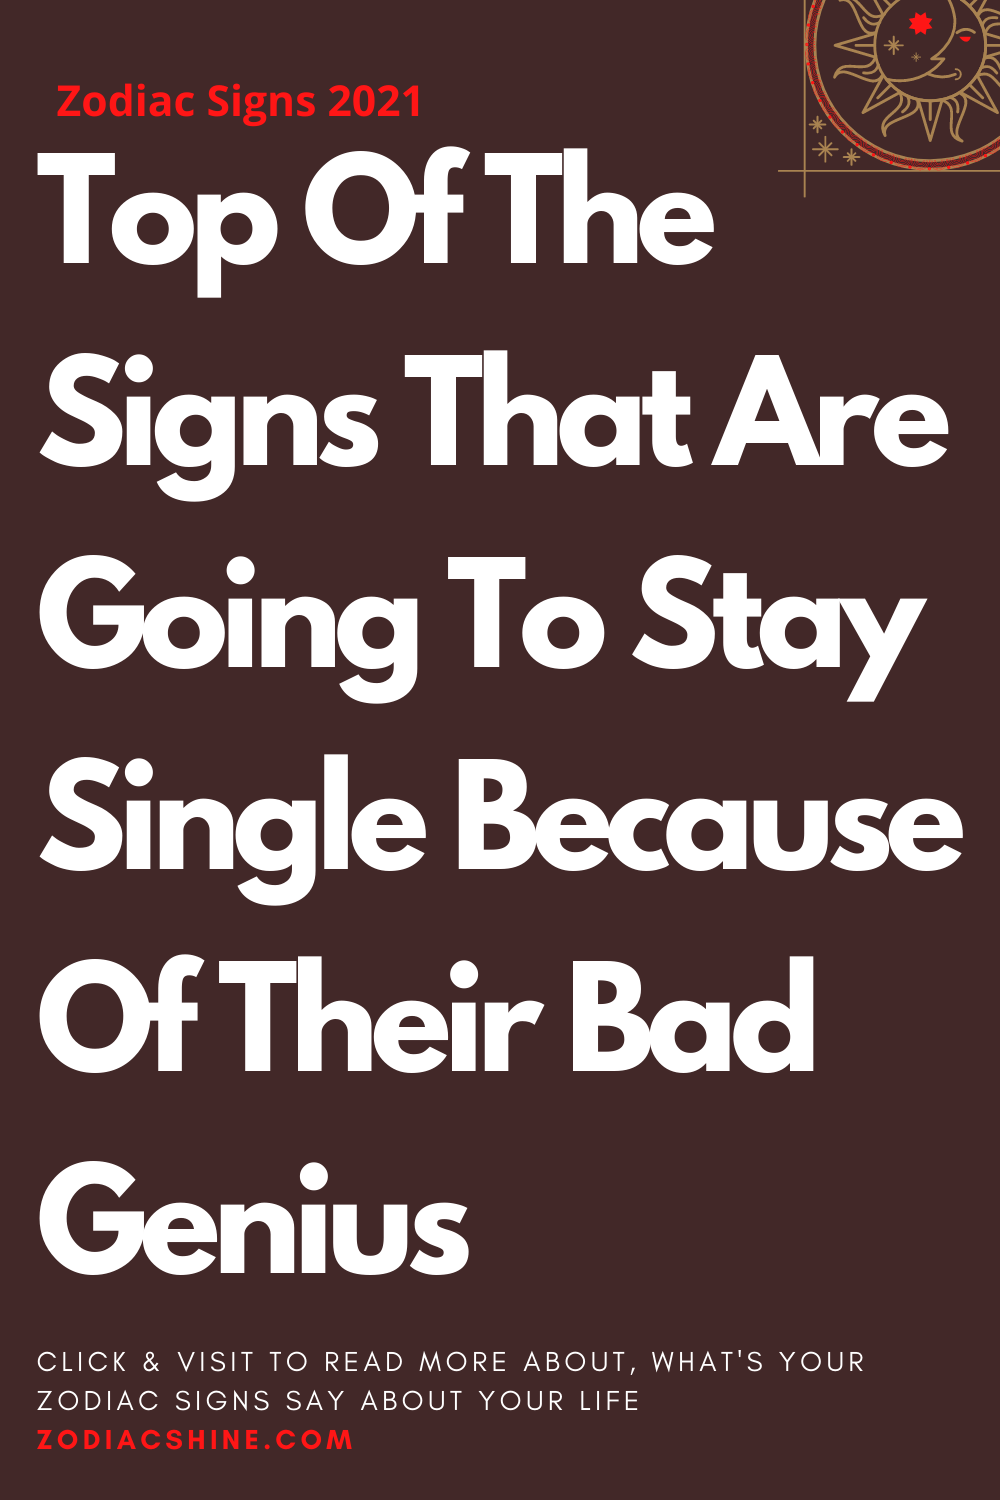 Top Of The Signs That Are Going To Stay Single Because Of Their Bad Genius